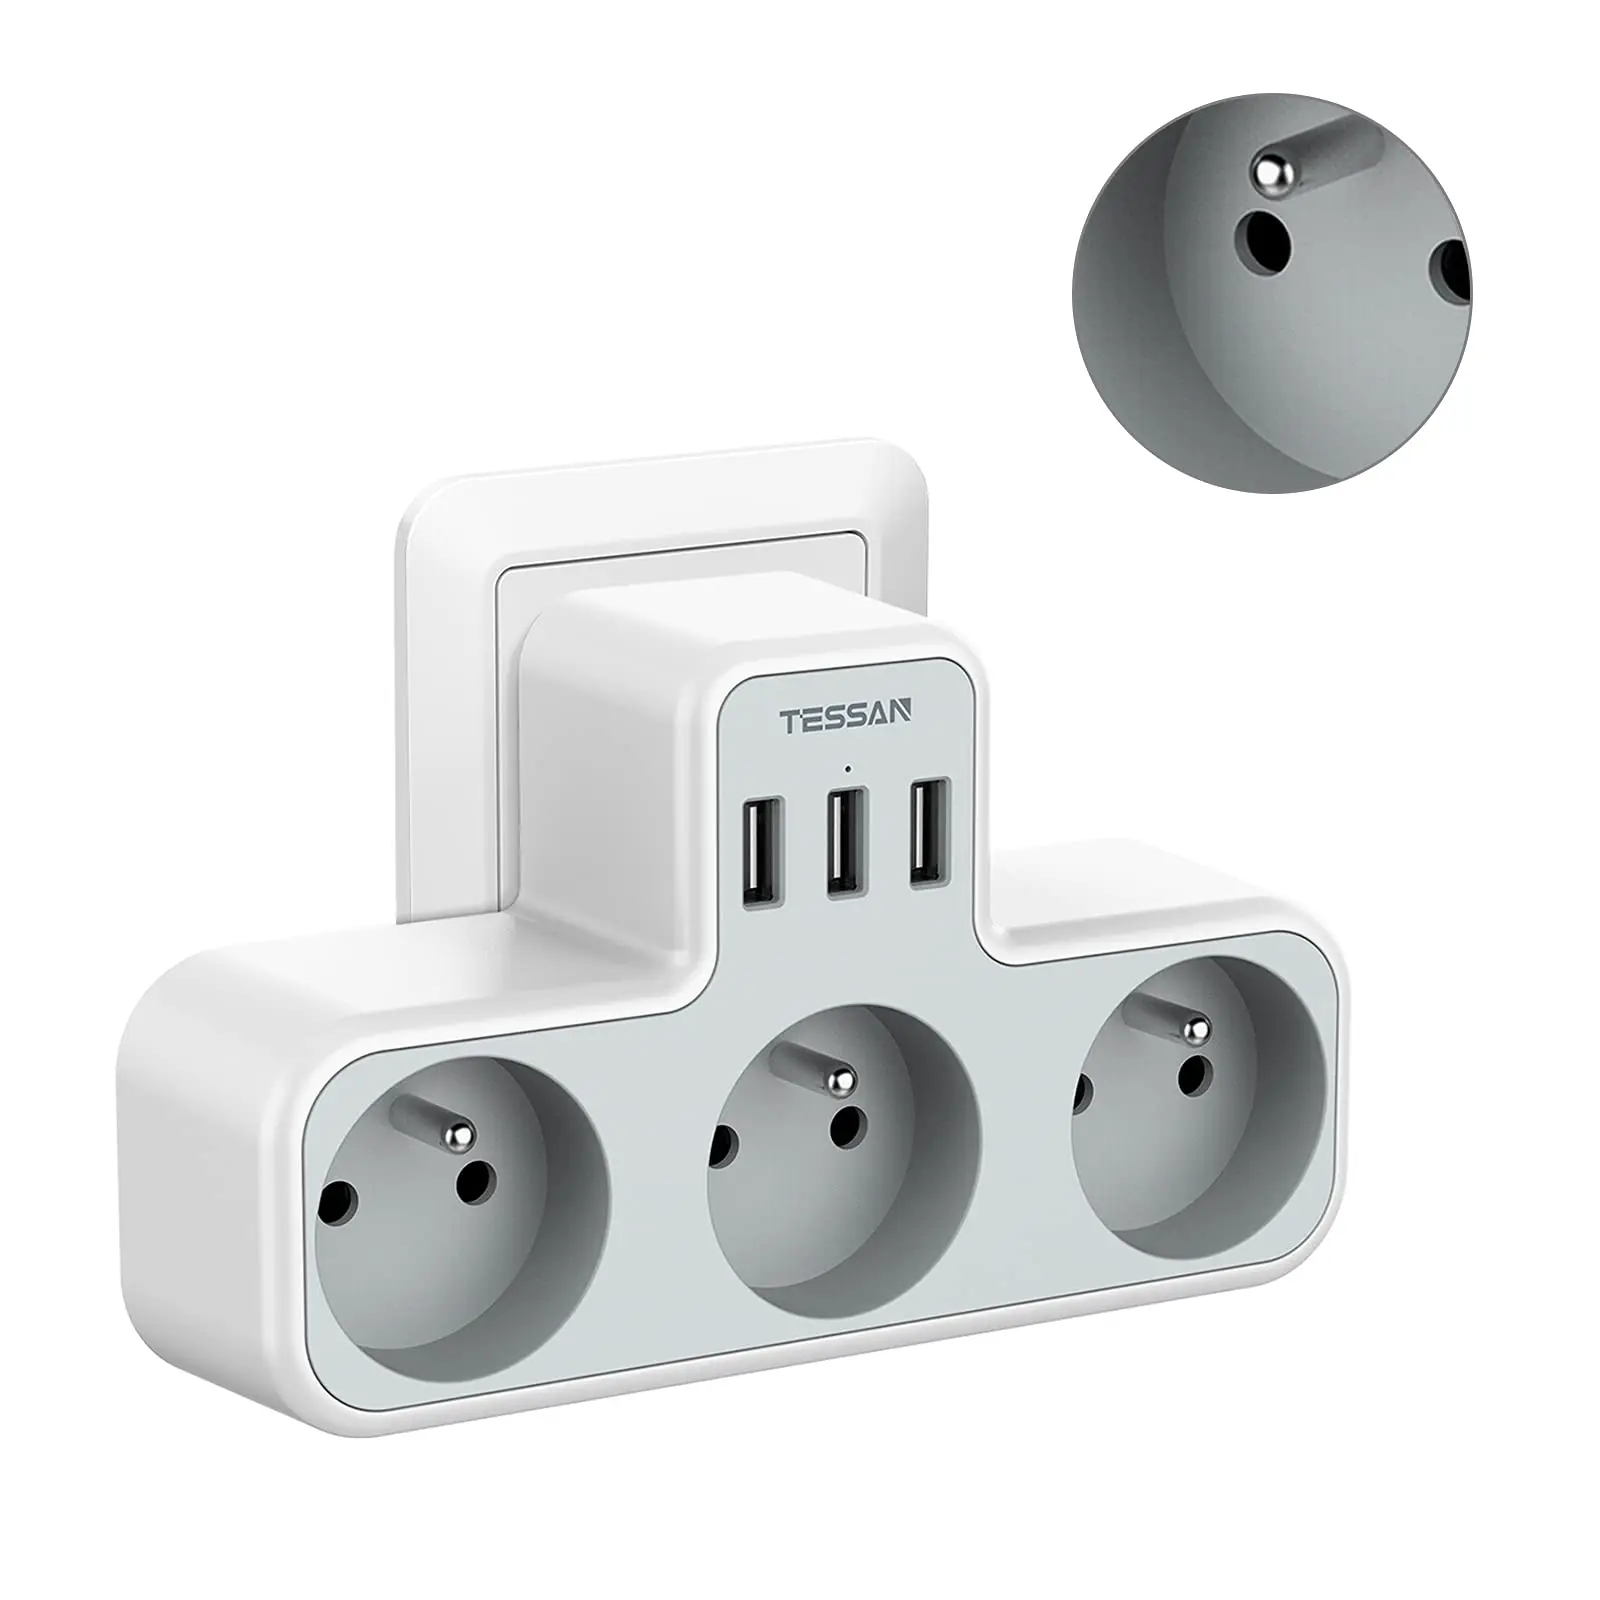 TESSAN 6 in 1 USB Power Socket Extender with 3 French Outlets 3 USB Ports, 16A Multiple Plugs Power Strip for Home, Office